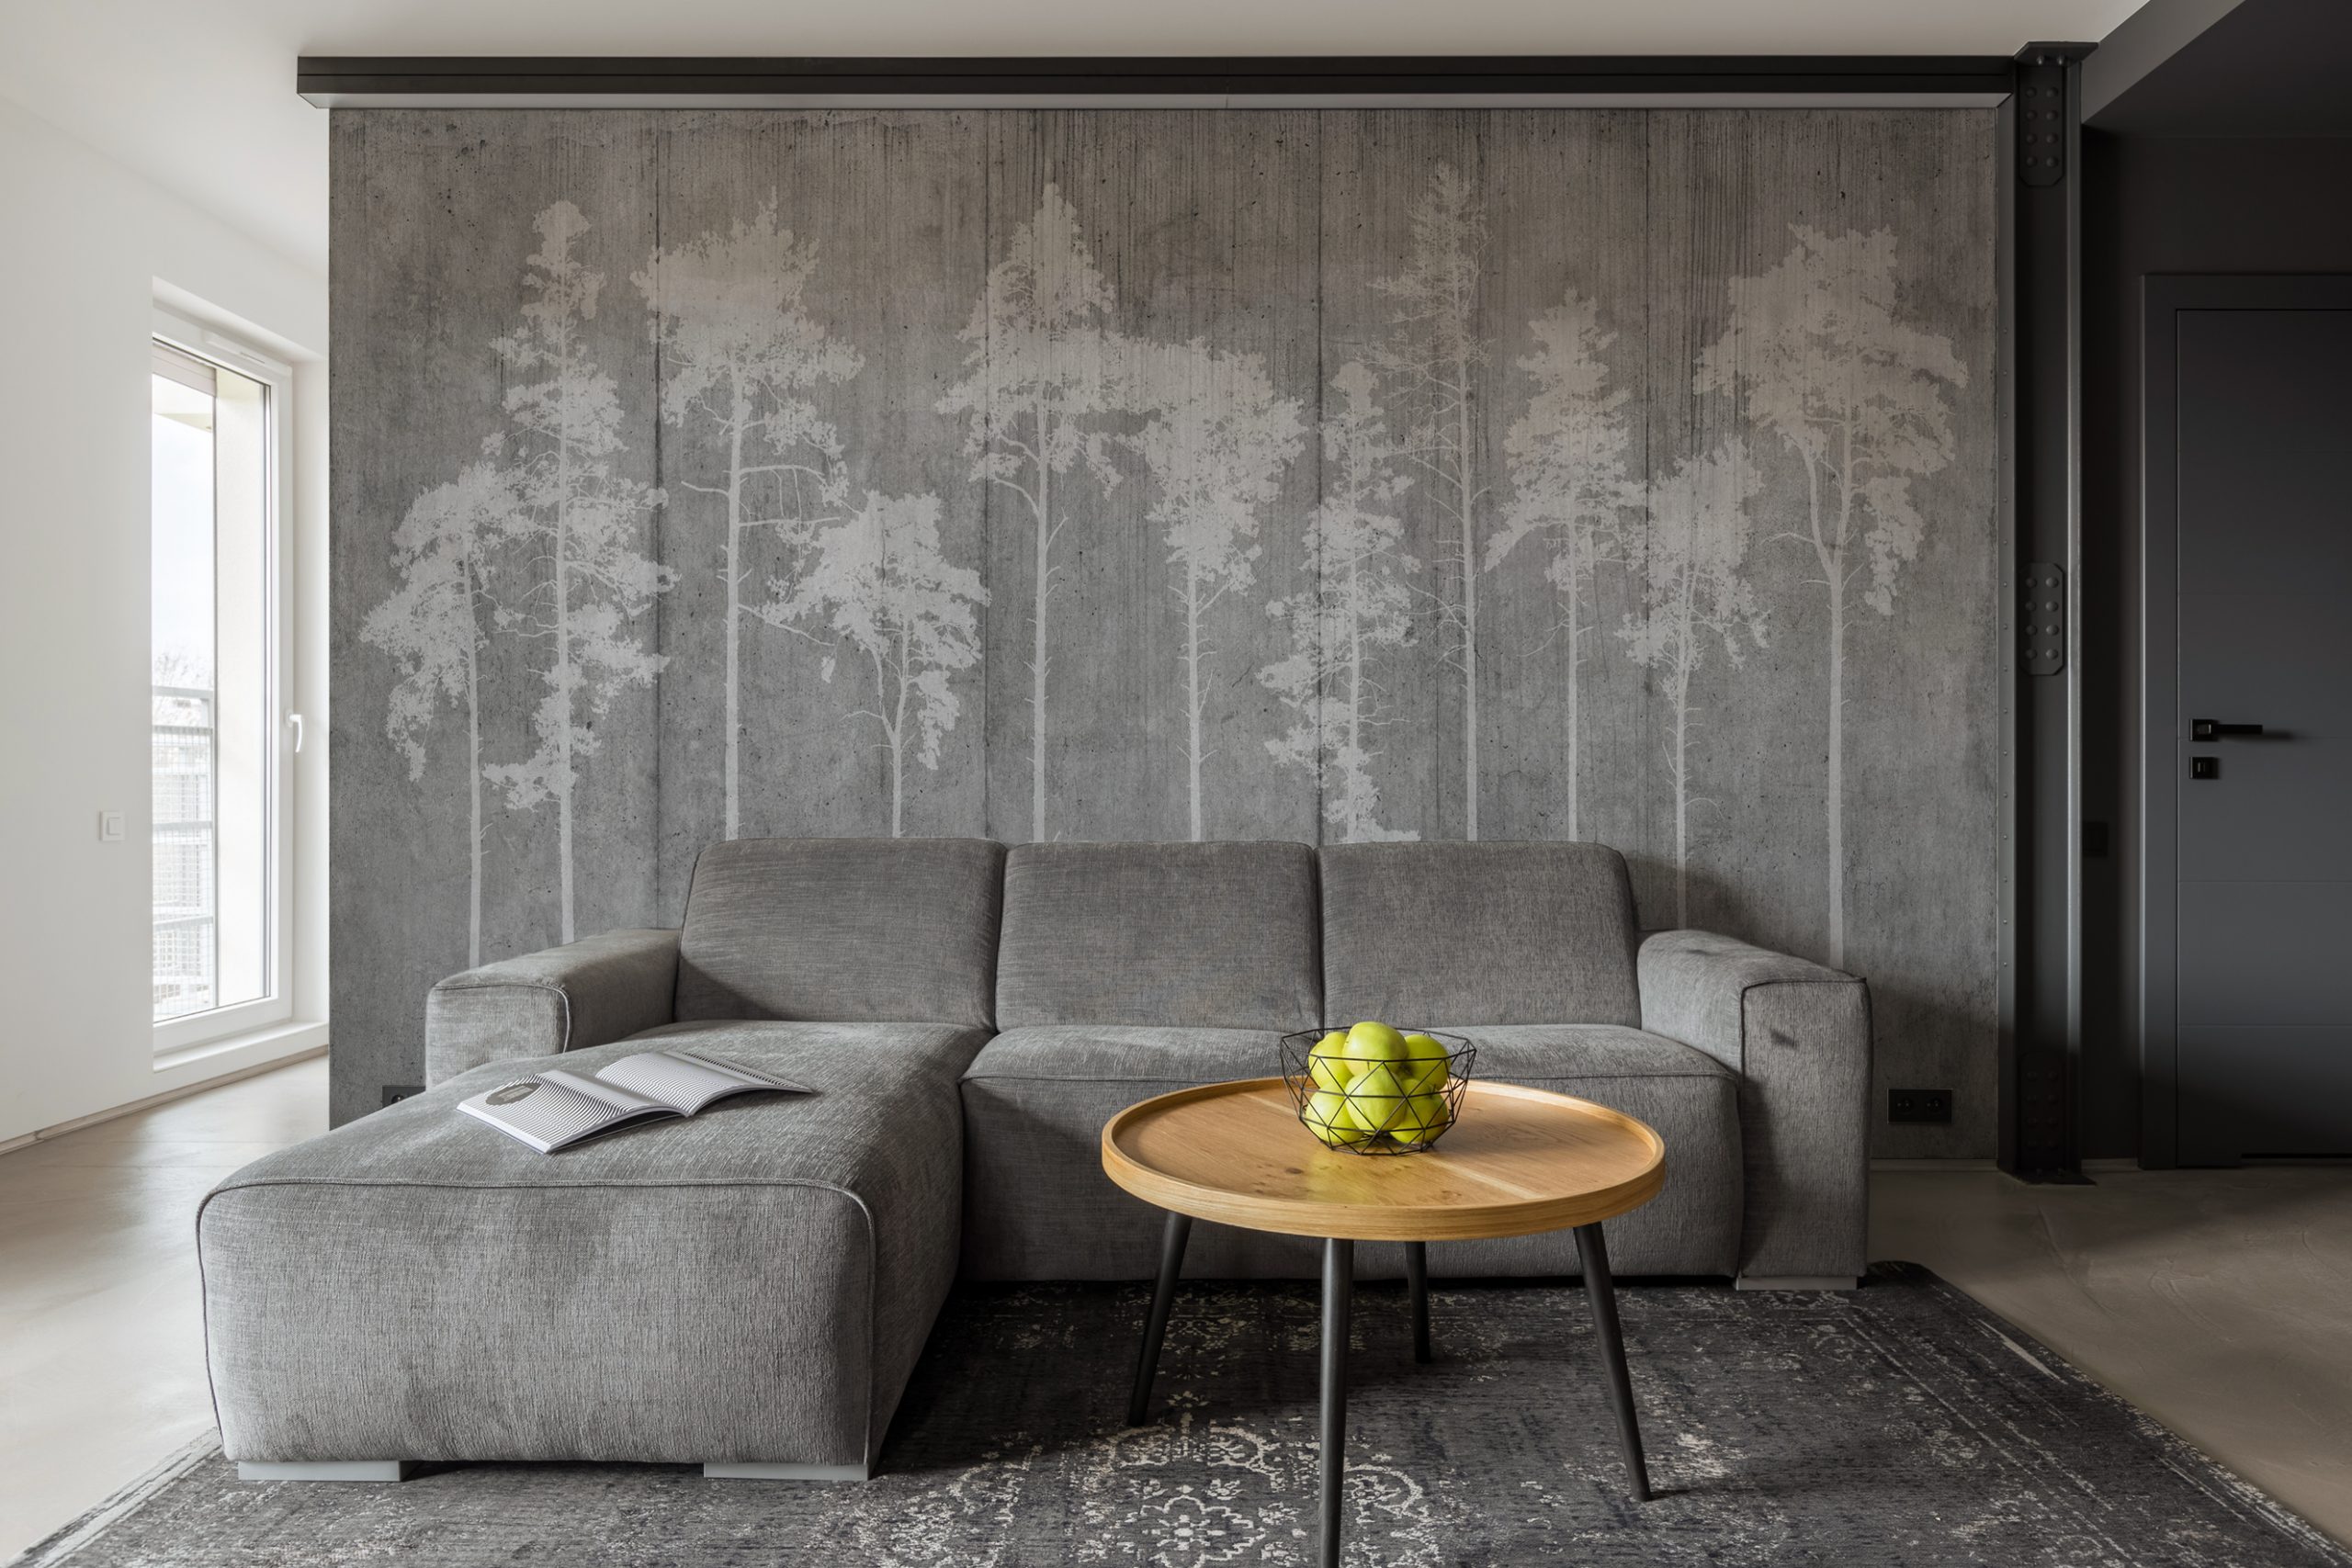 Concrete Forest wallpaper wallcovering